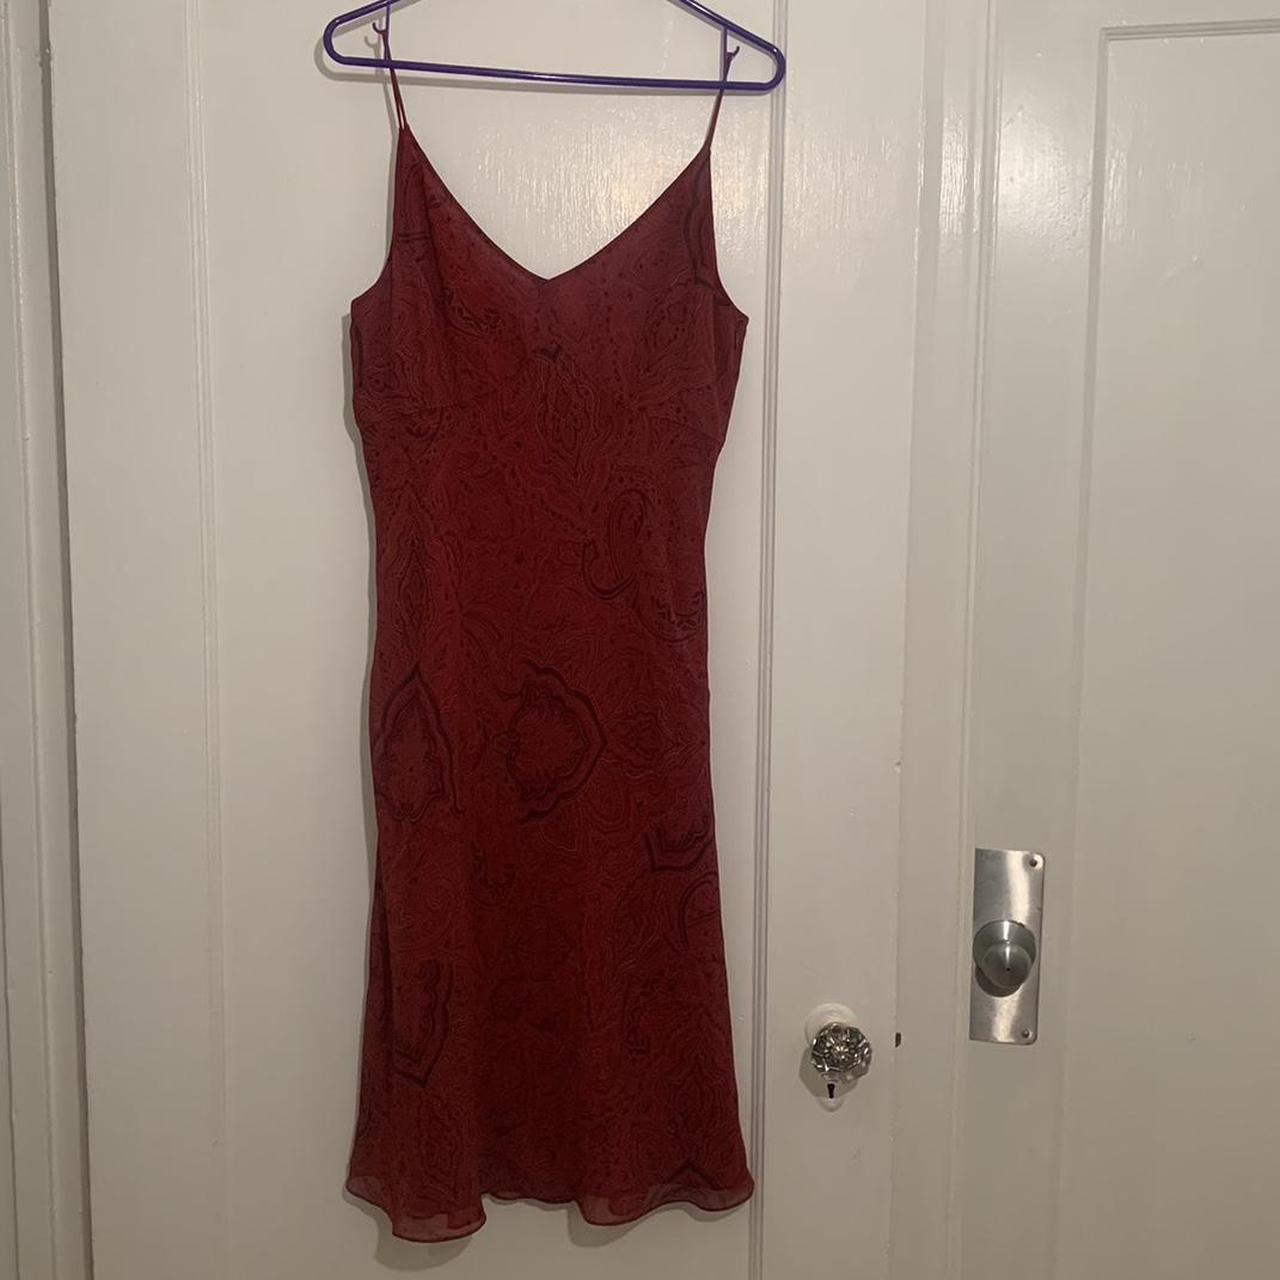 Ann Taylor Women's Burgundy and Red Dress